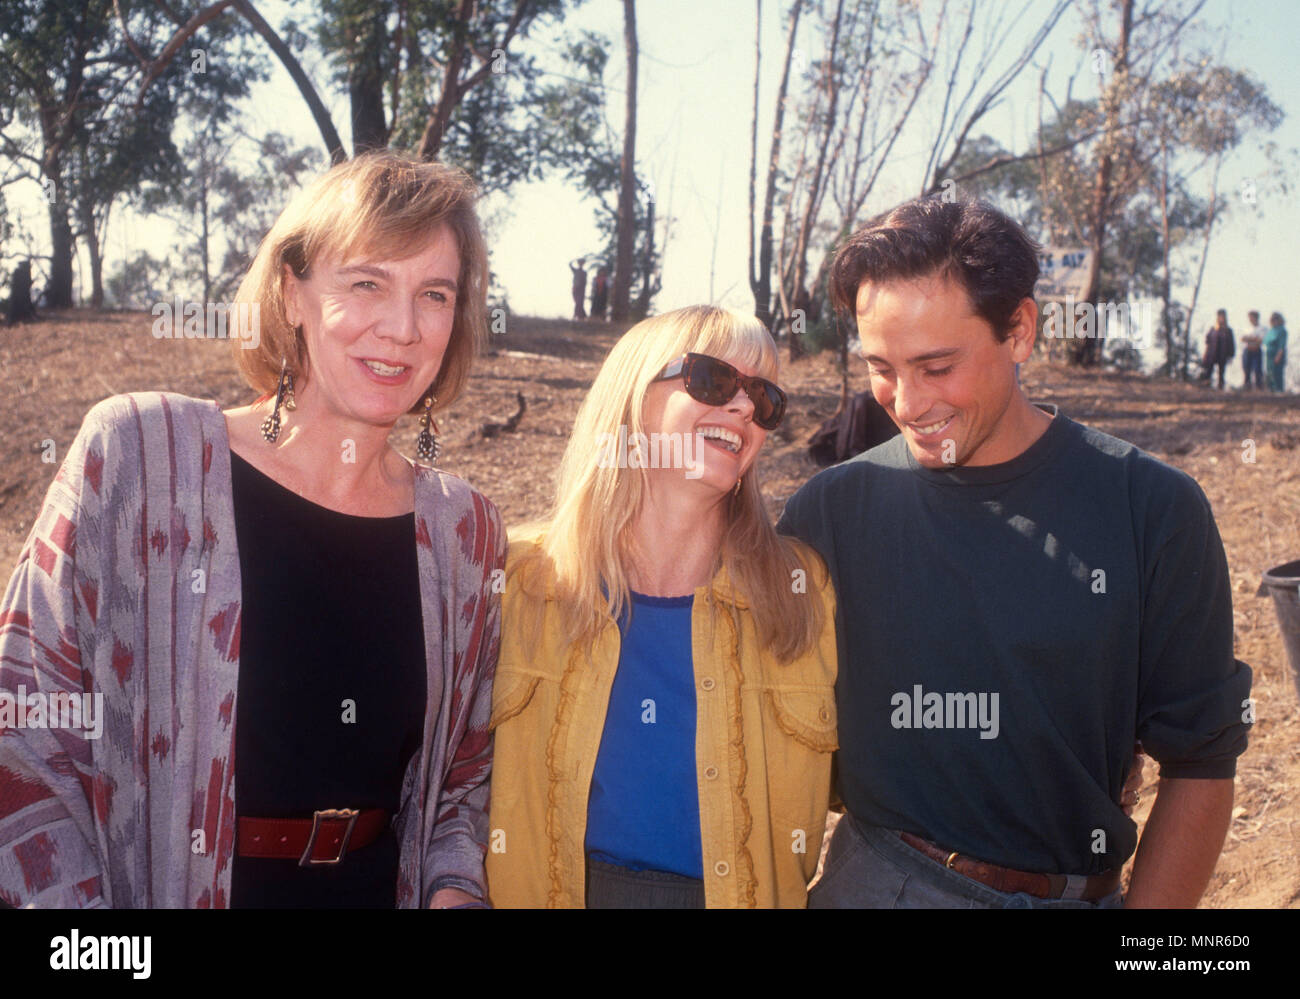 LOS ANGELES, CA - DECEMBER 1: (L-R) Actress Catherine E. Coulson, Singer Olivia Newton-John and actor Matt Lattanzi attend tree planting reforestation event on December 1, 1990 in Los Angeles, California. Photo by Barry King/Alamy Stock Photo Stock Photo